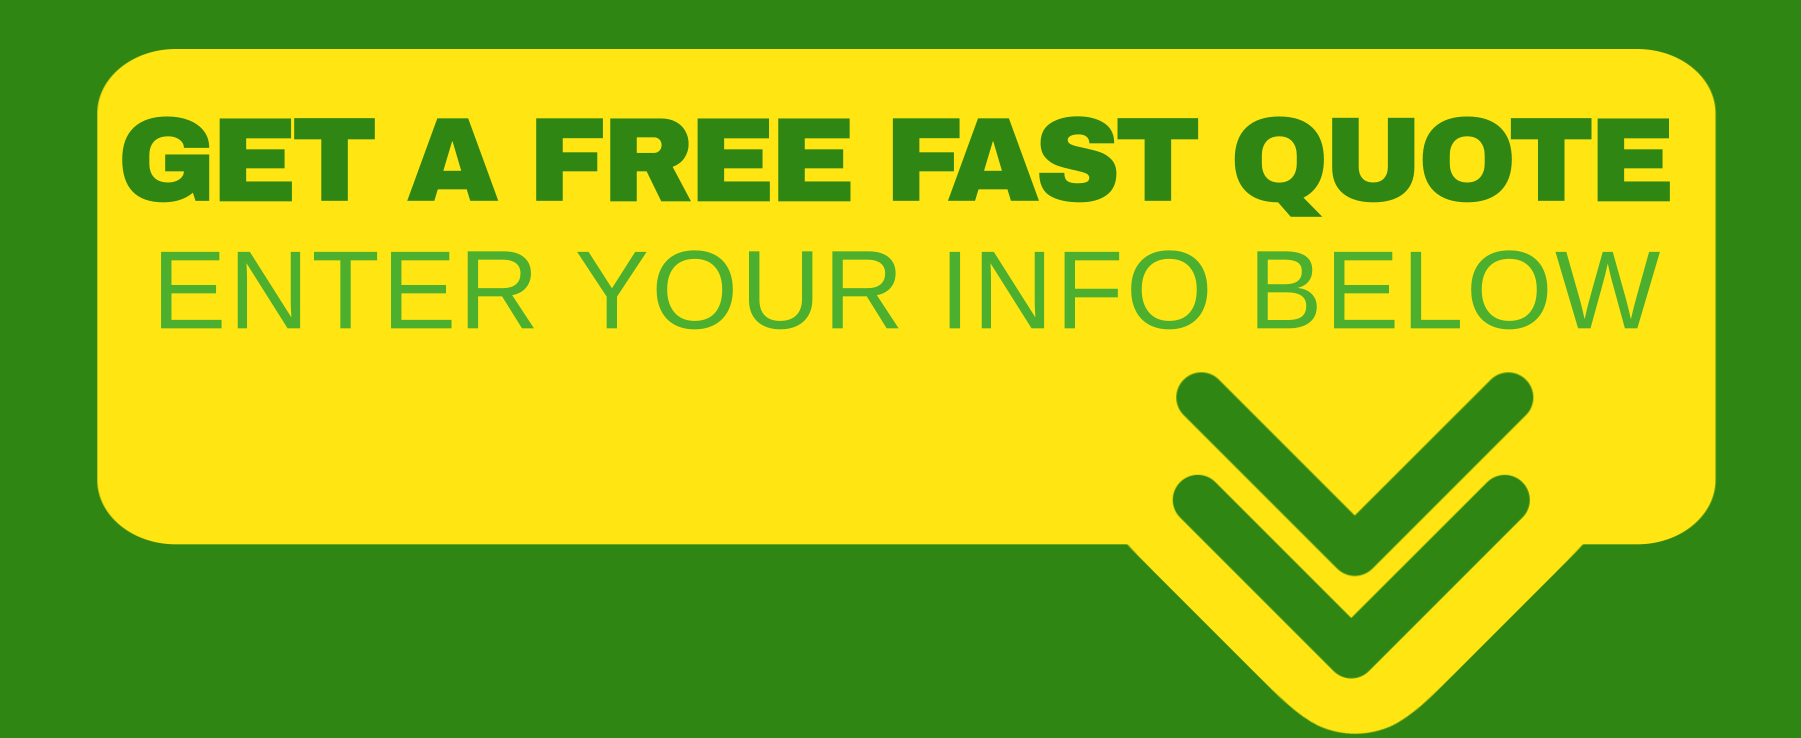 banner for free fat quote over a contact form